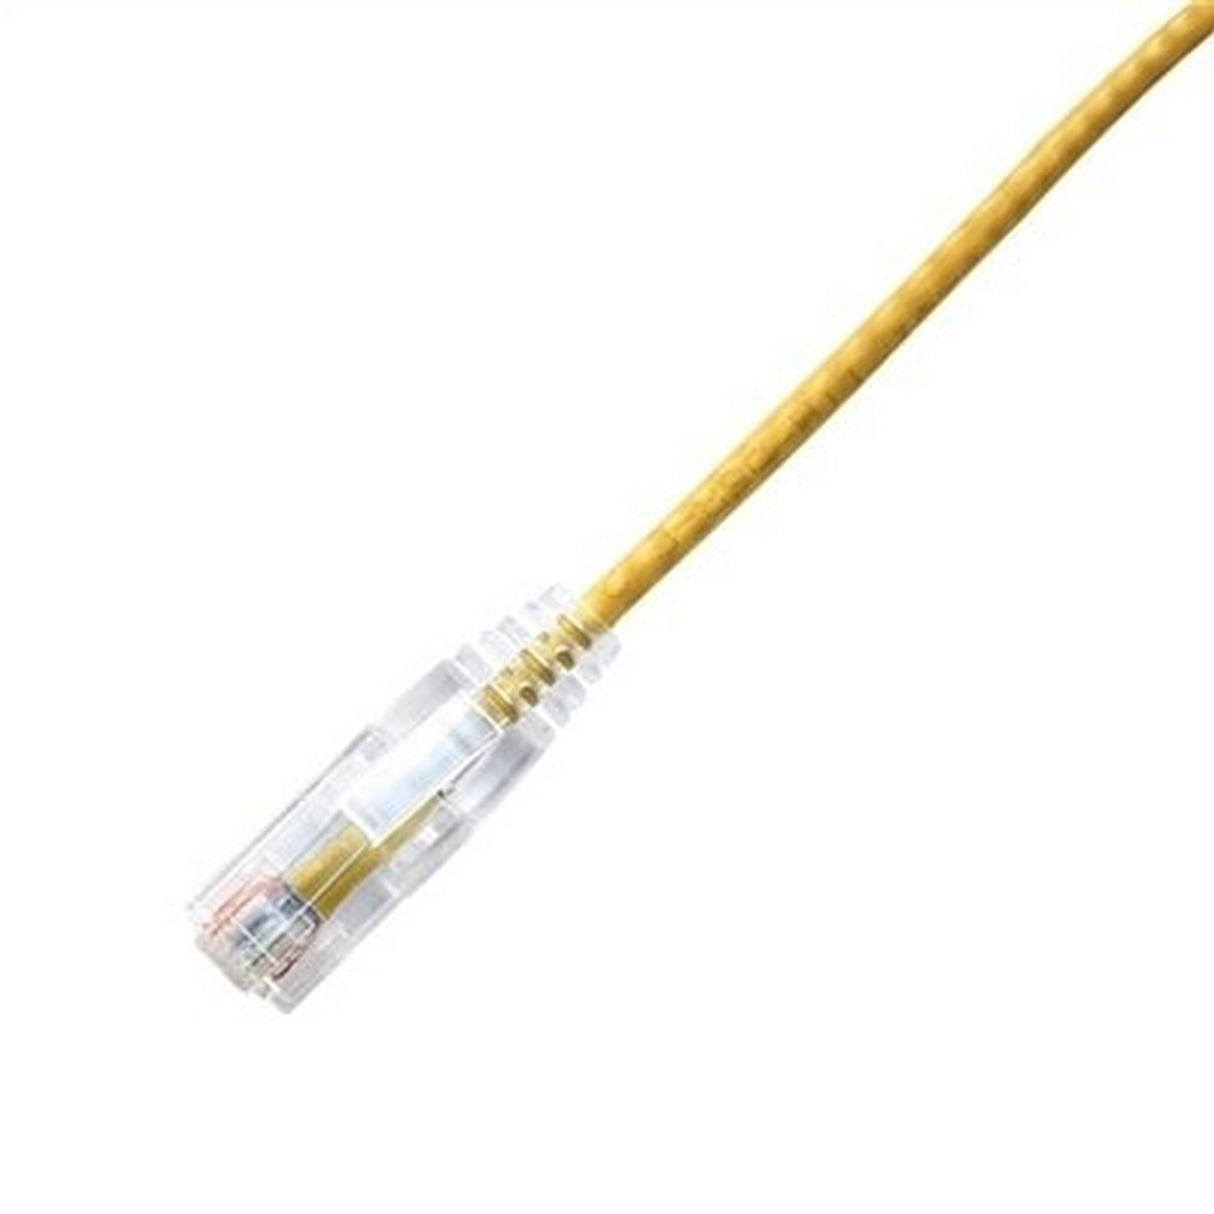 LYNN CPCS-AYE-005F CHOICE Slim 28AWG CAT6A Ethernet Patch Cable, 5-Foot, Yellow